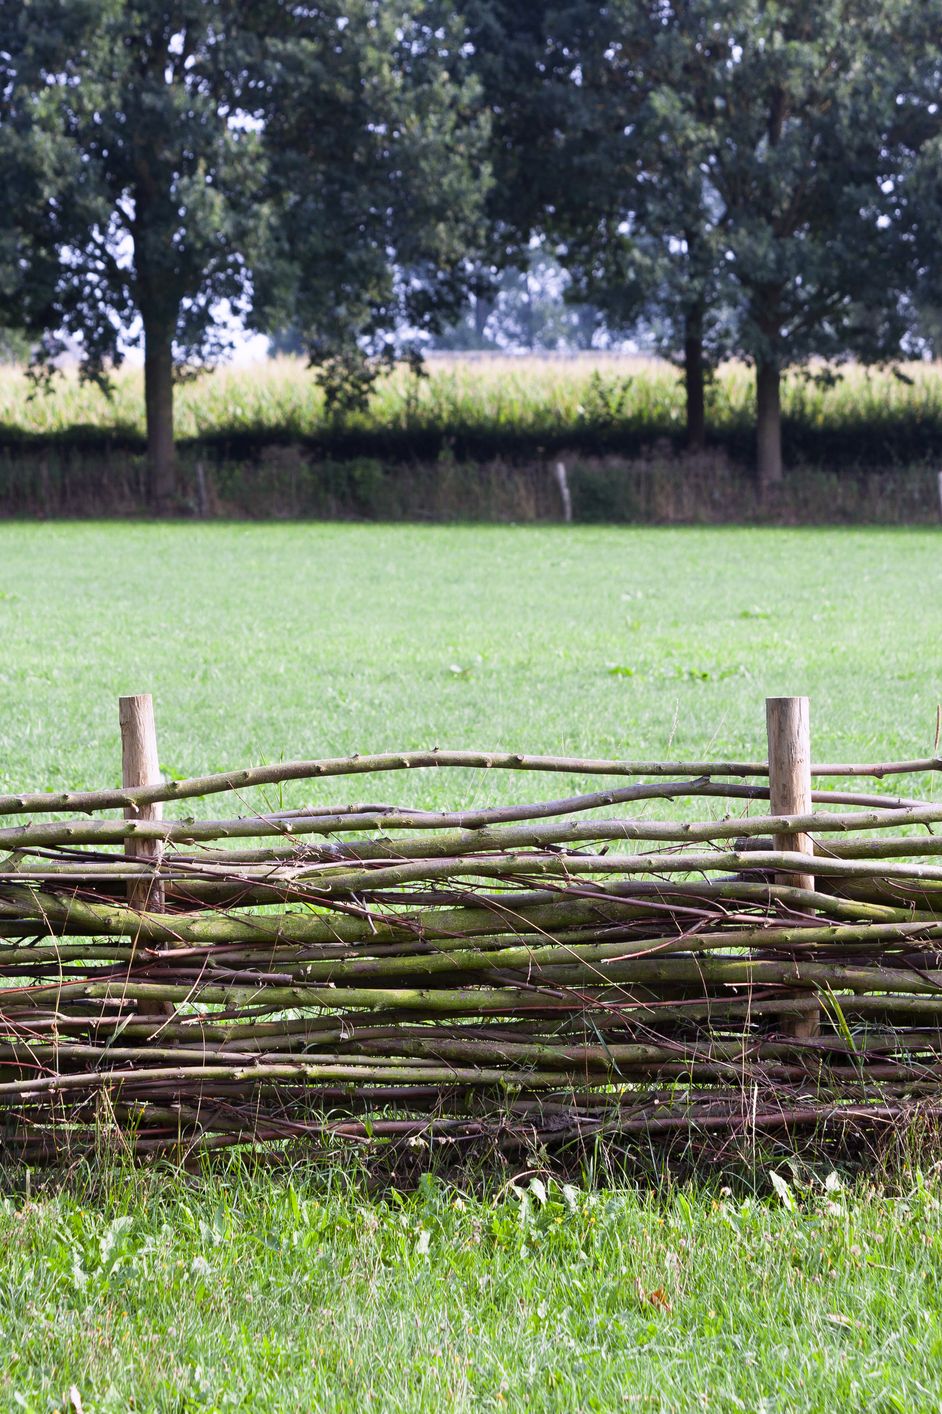 Wattle fence with a corn field in the background